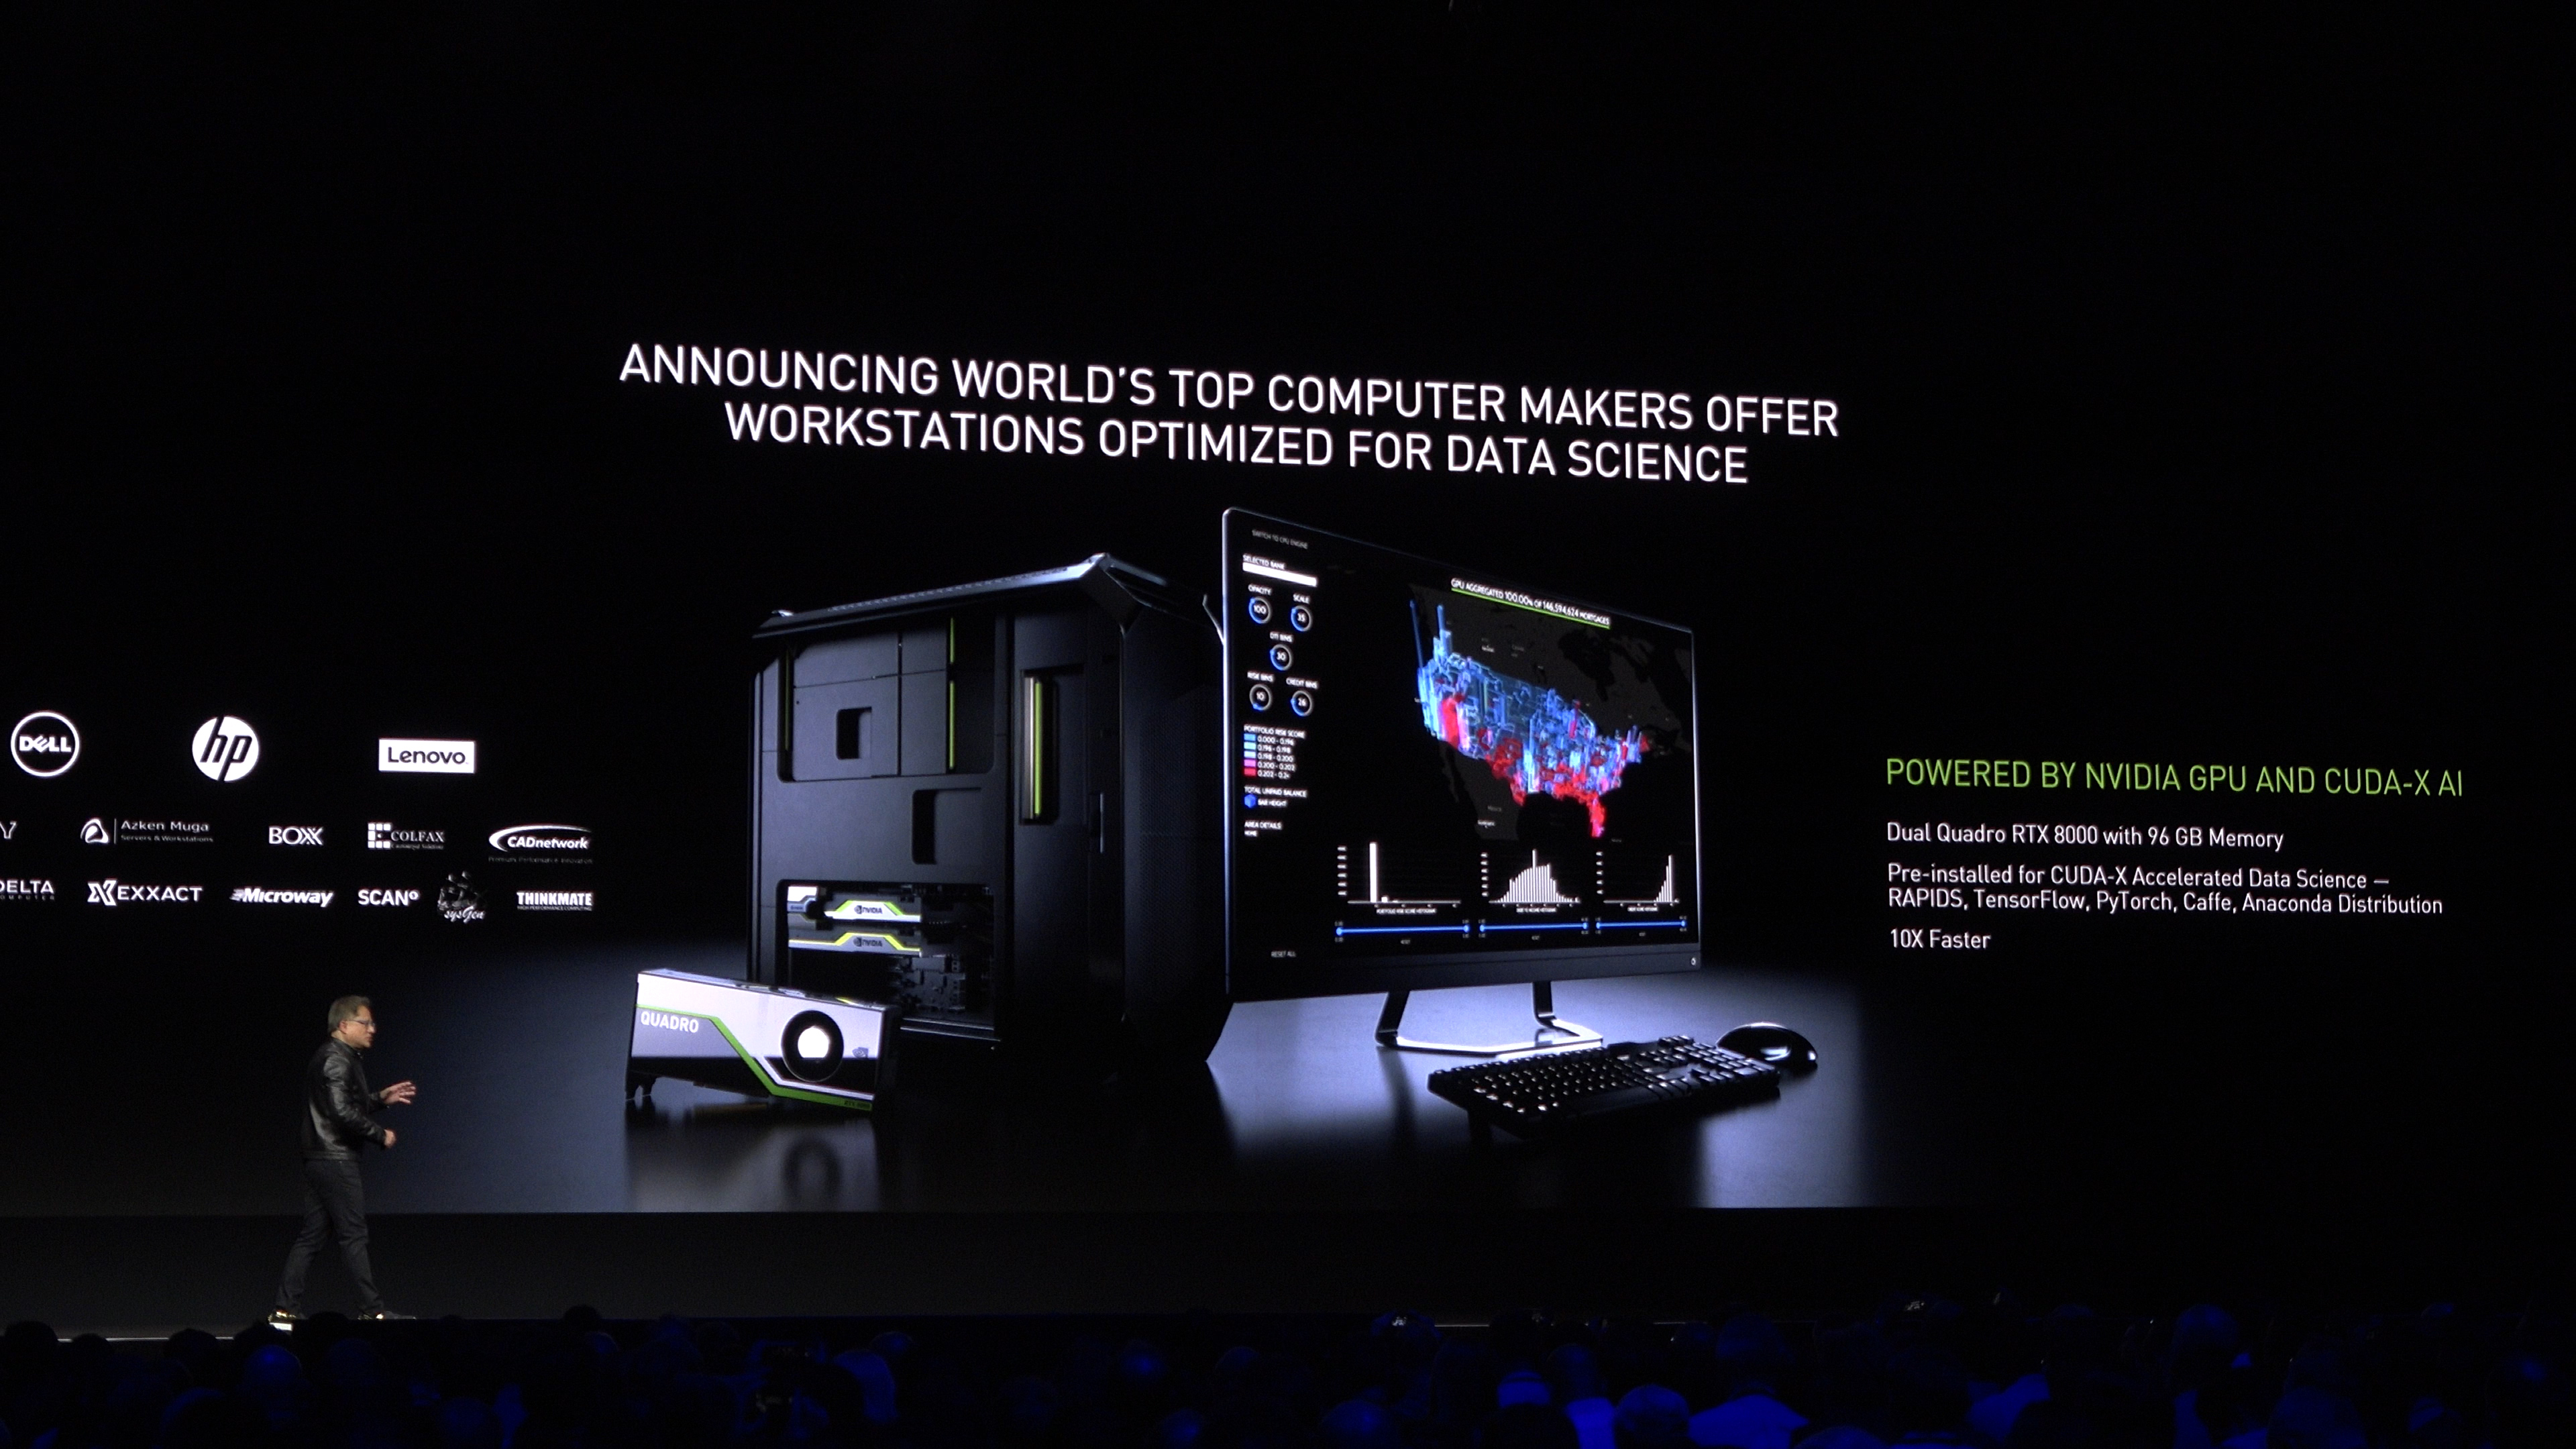 CEO of Nvidia announces Workstation for Data Scientists at GTC 2019